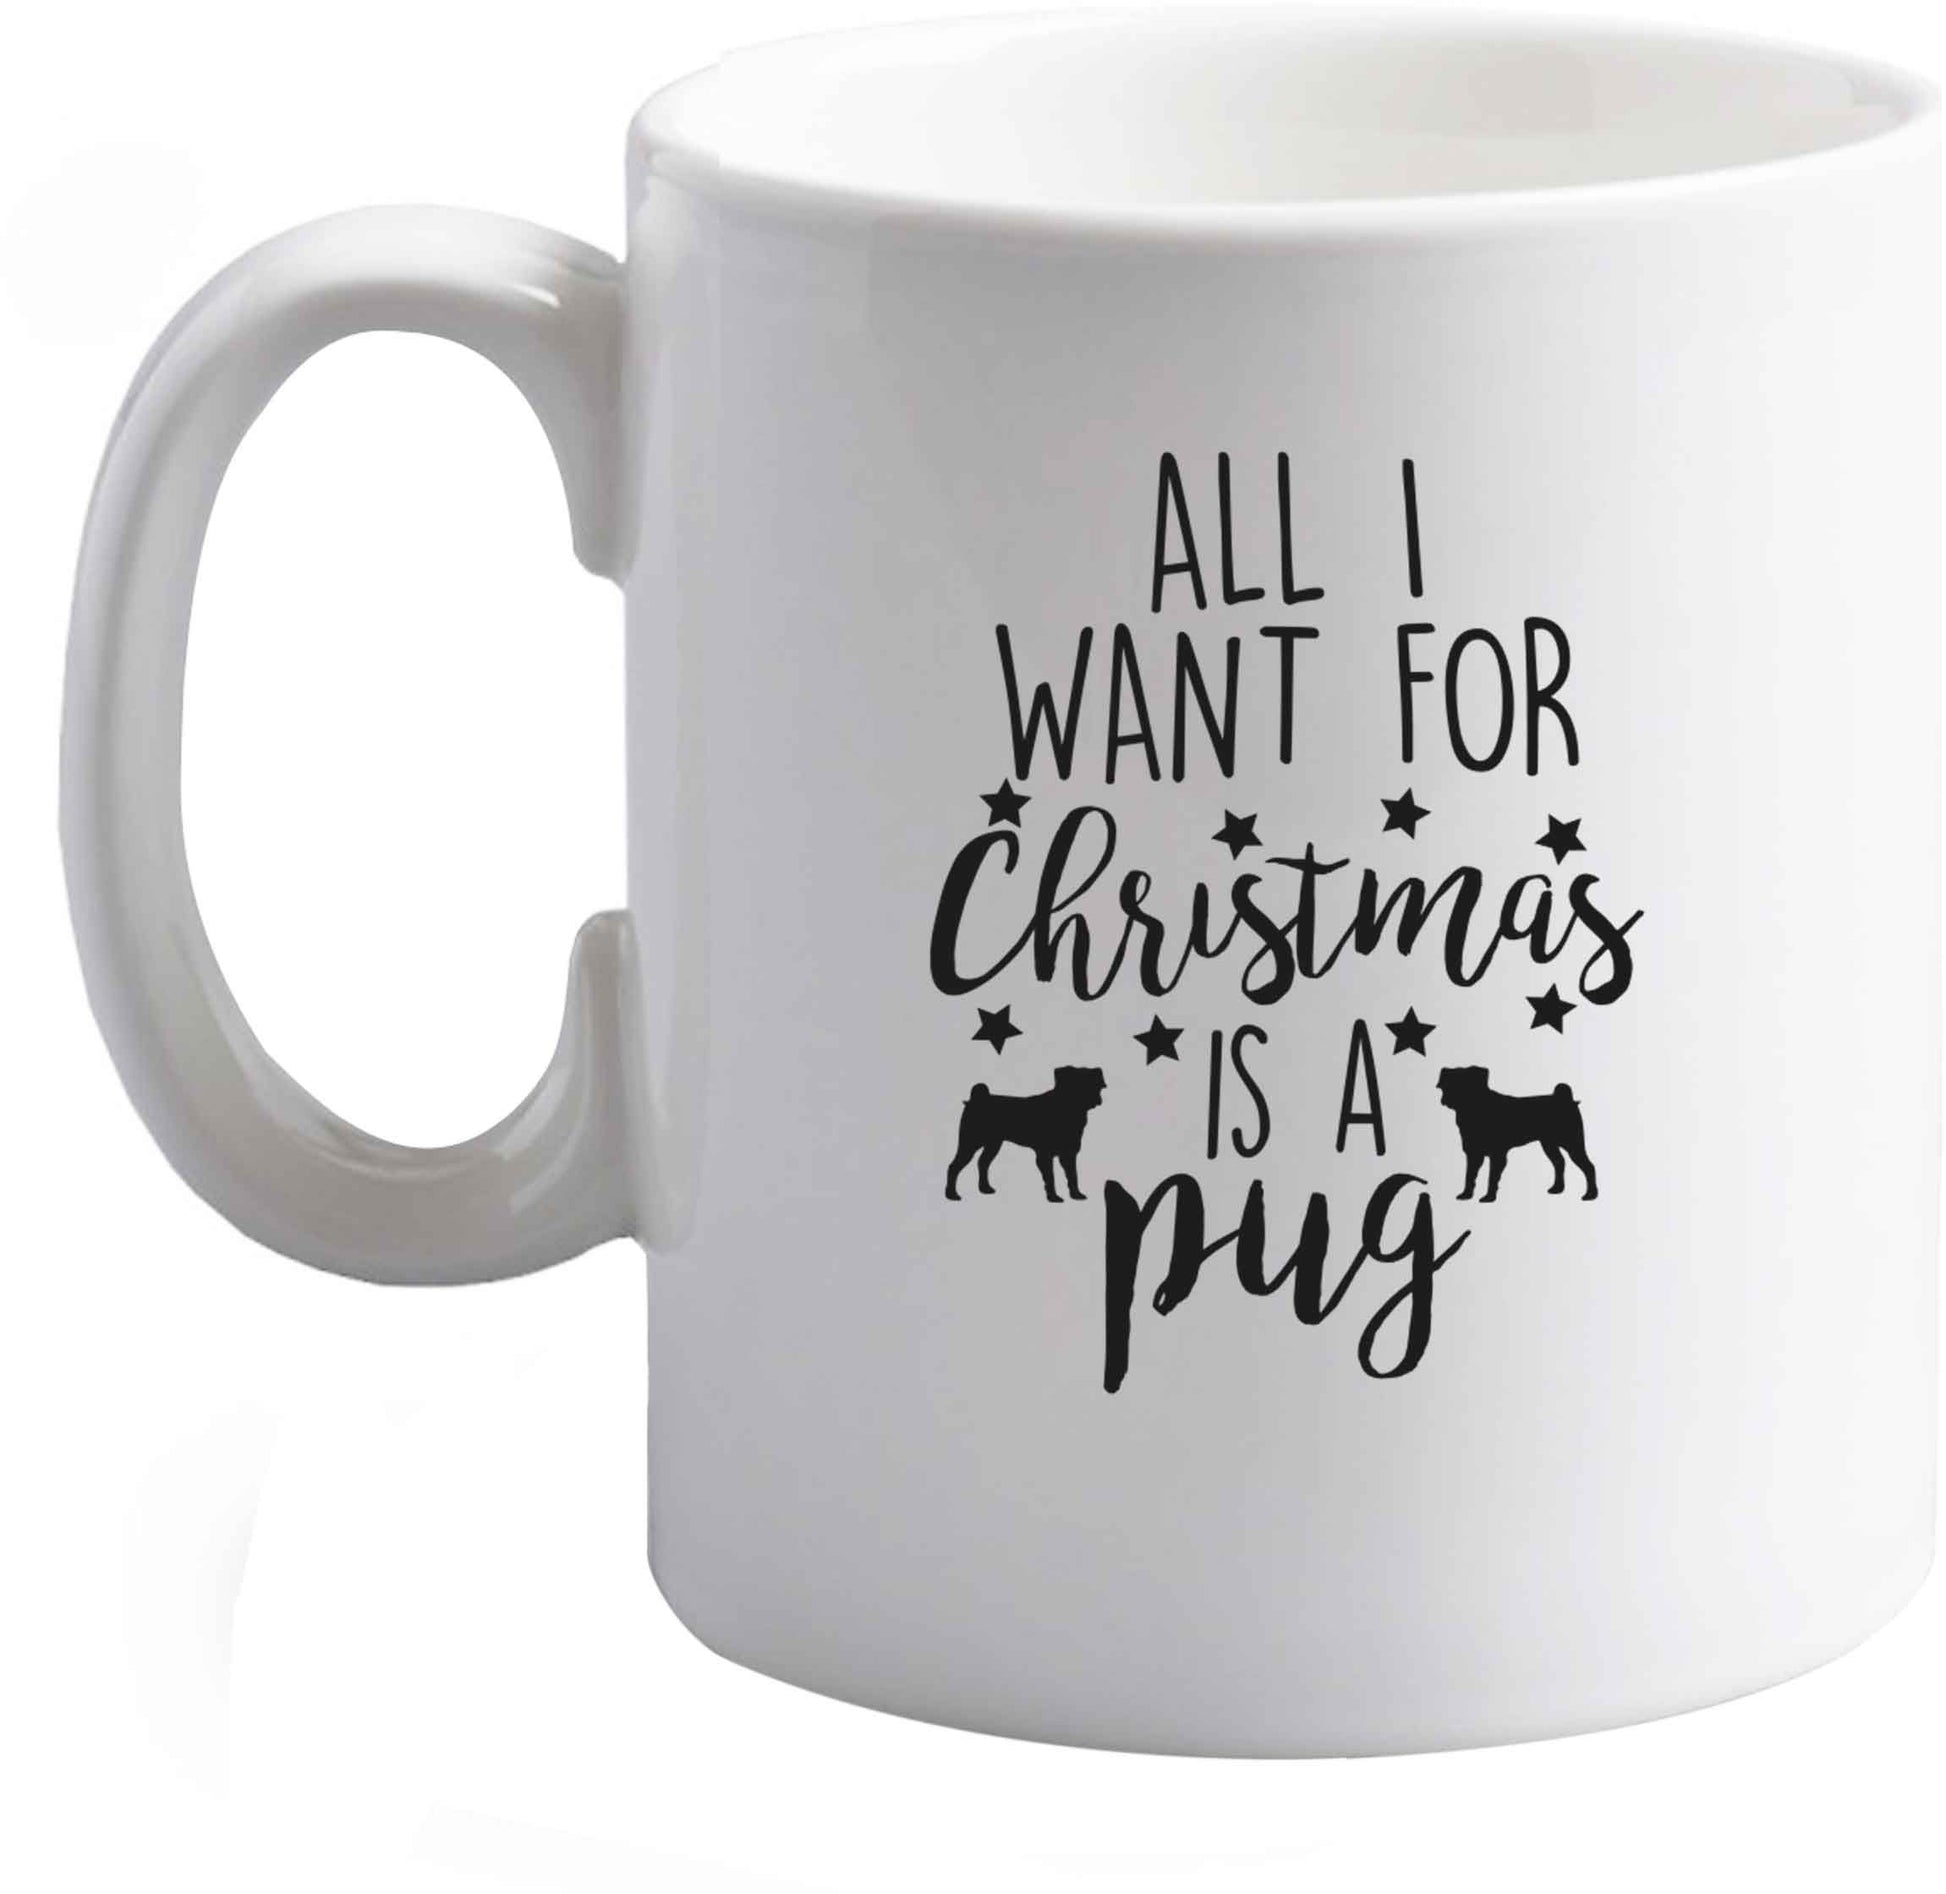 10 oz All I want for Christmas is a pug ceramic mug right handed